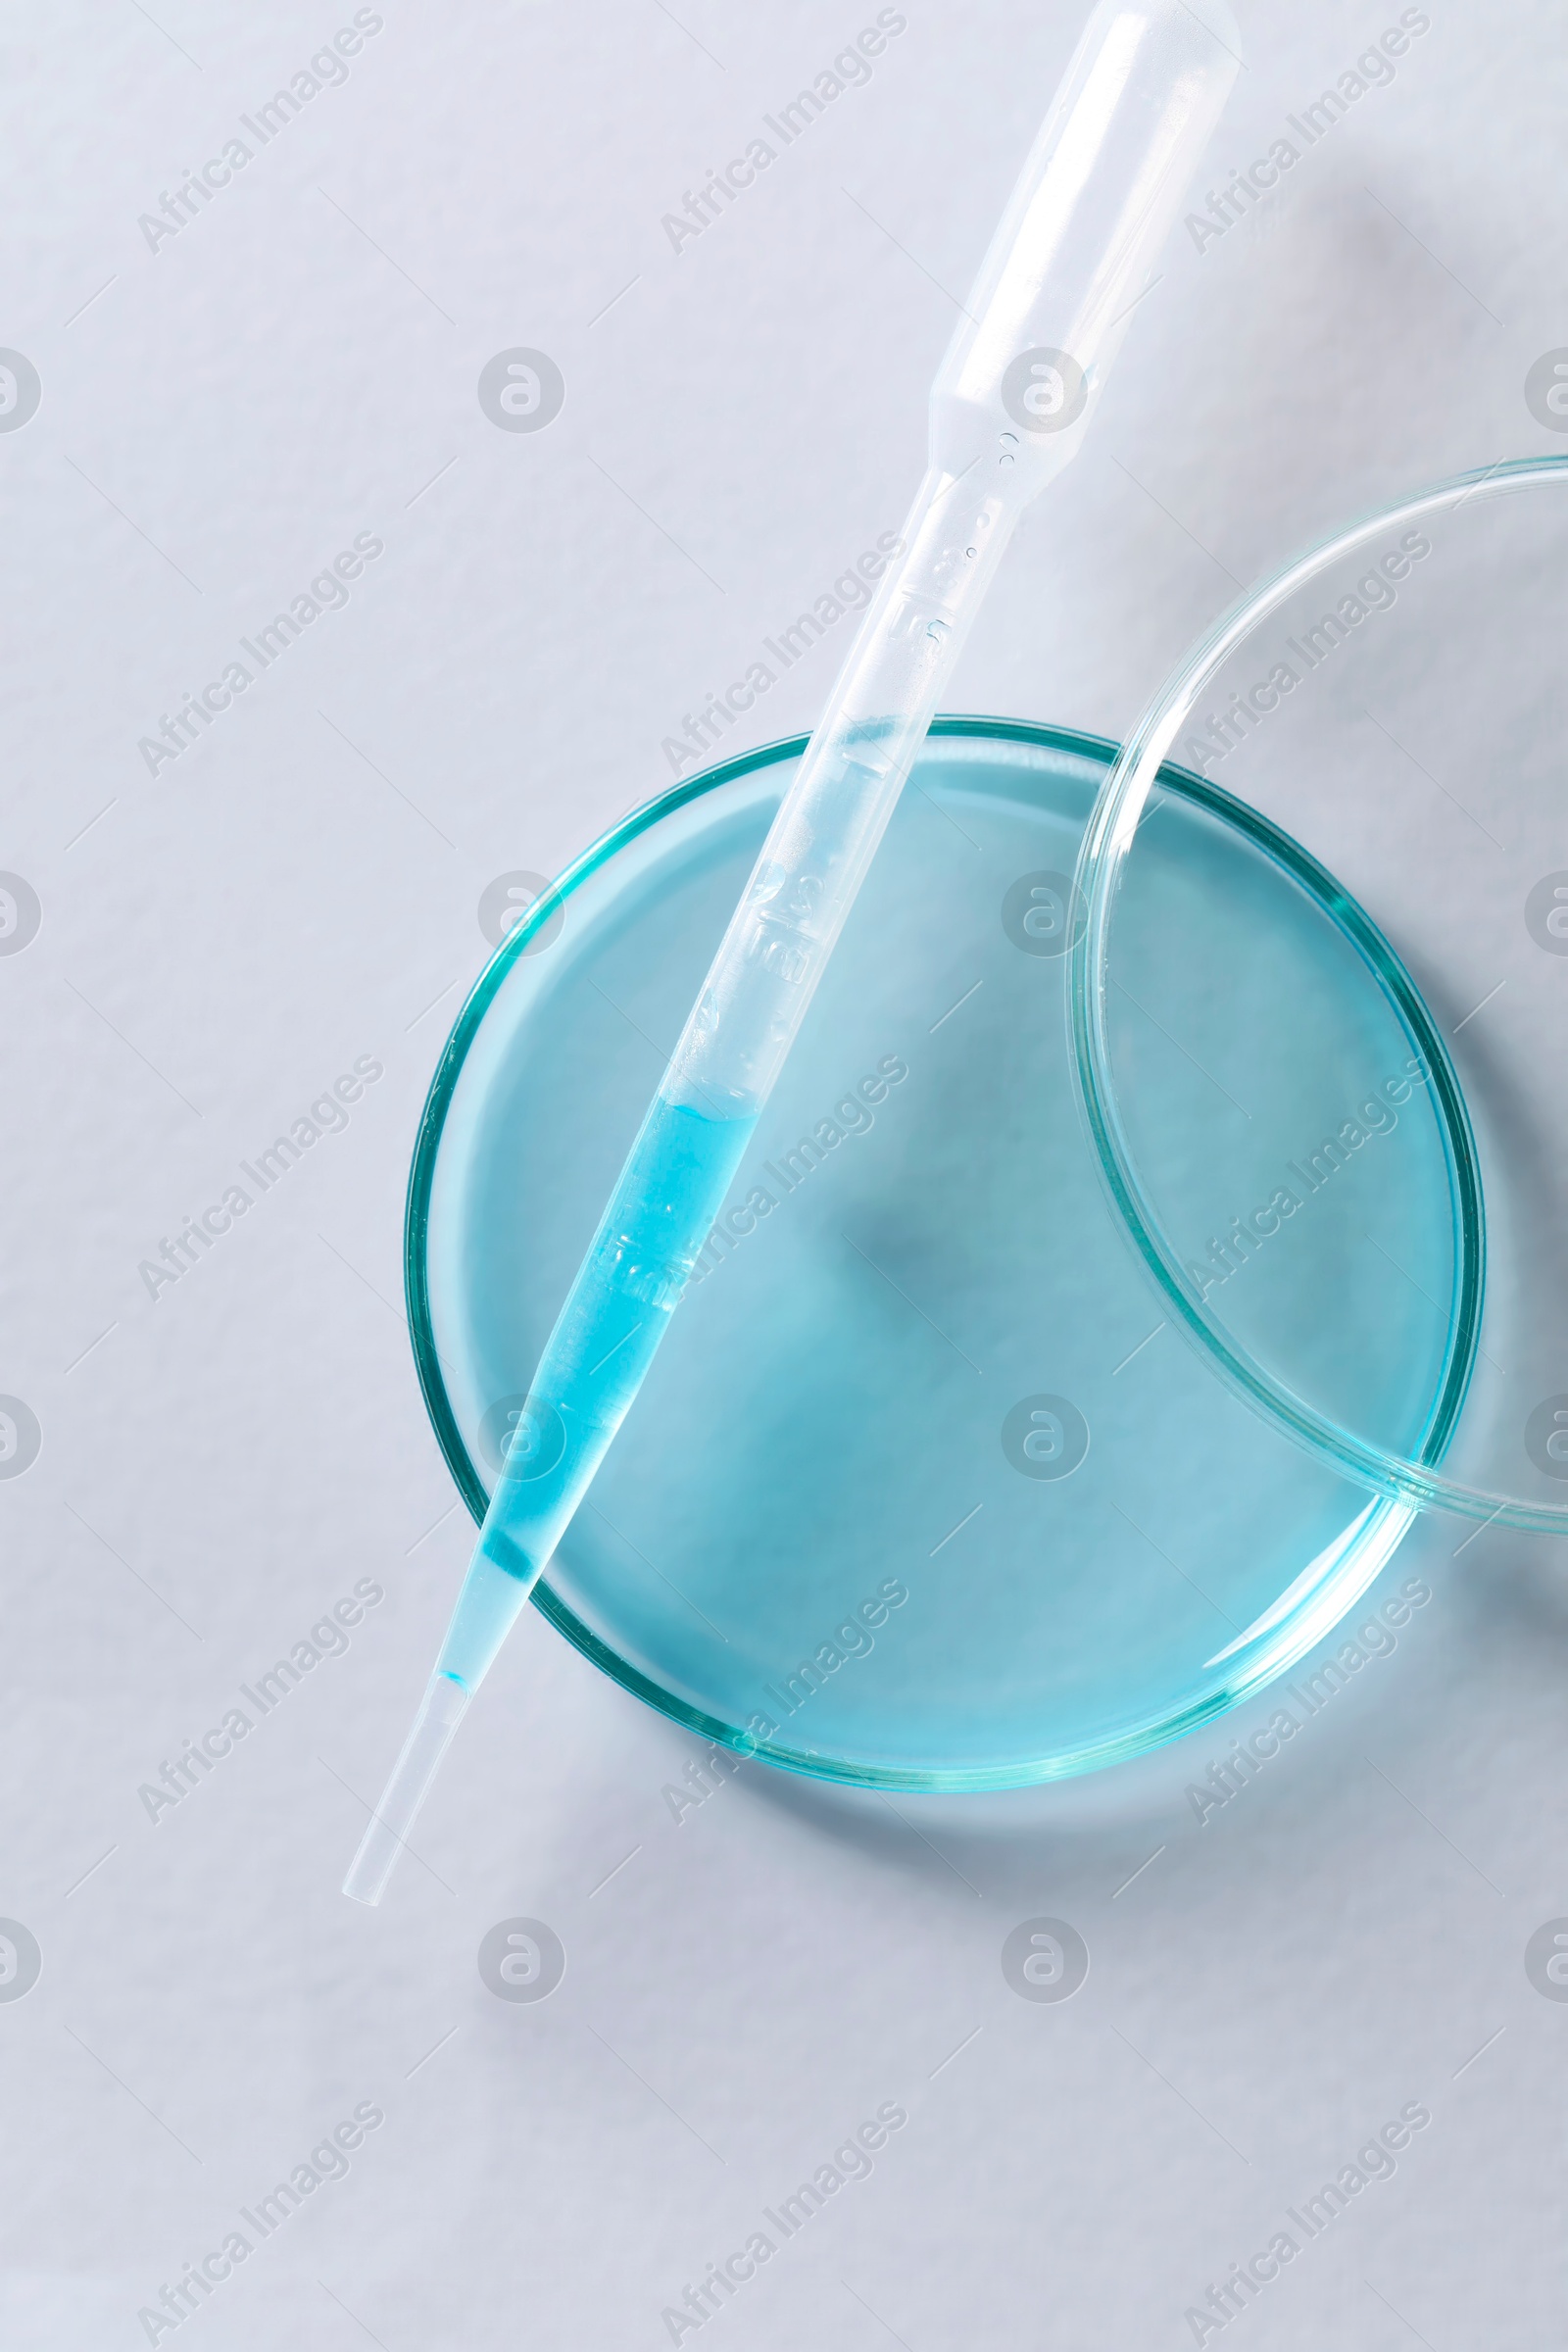 Photo of Transfer pipette and petri dish on white background, top view